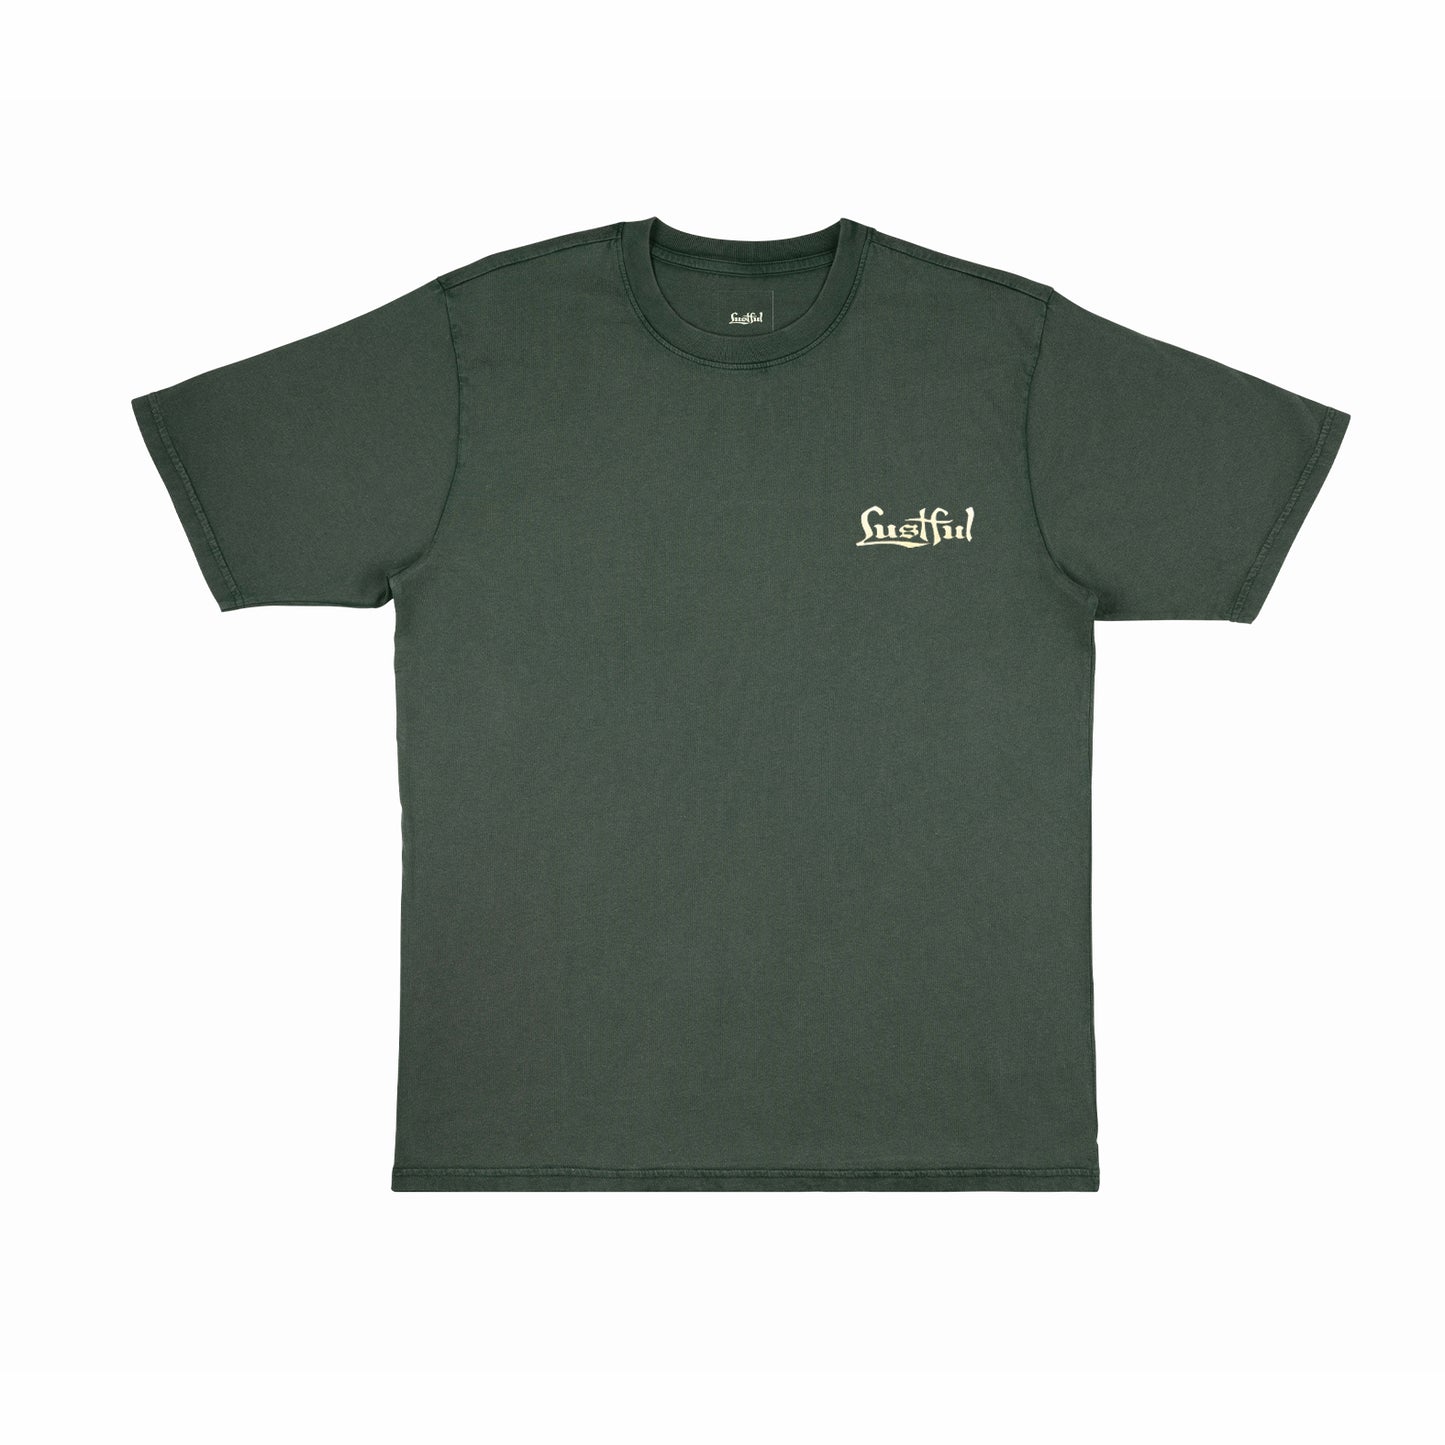 OG logo EMBroidery in aged army green